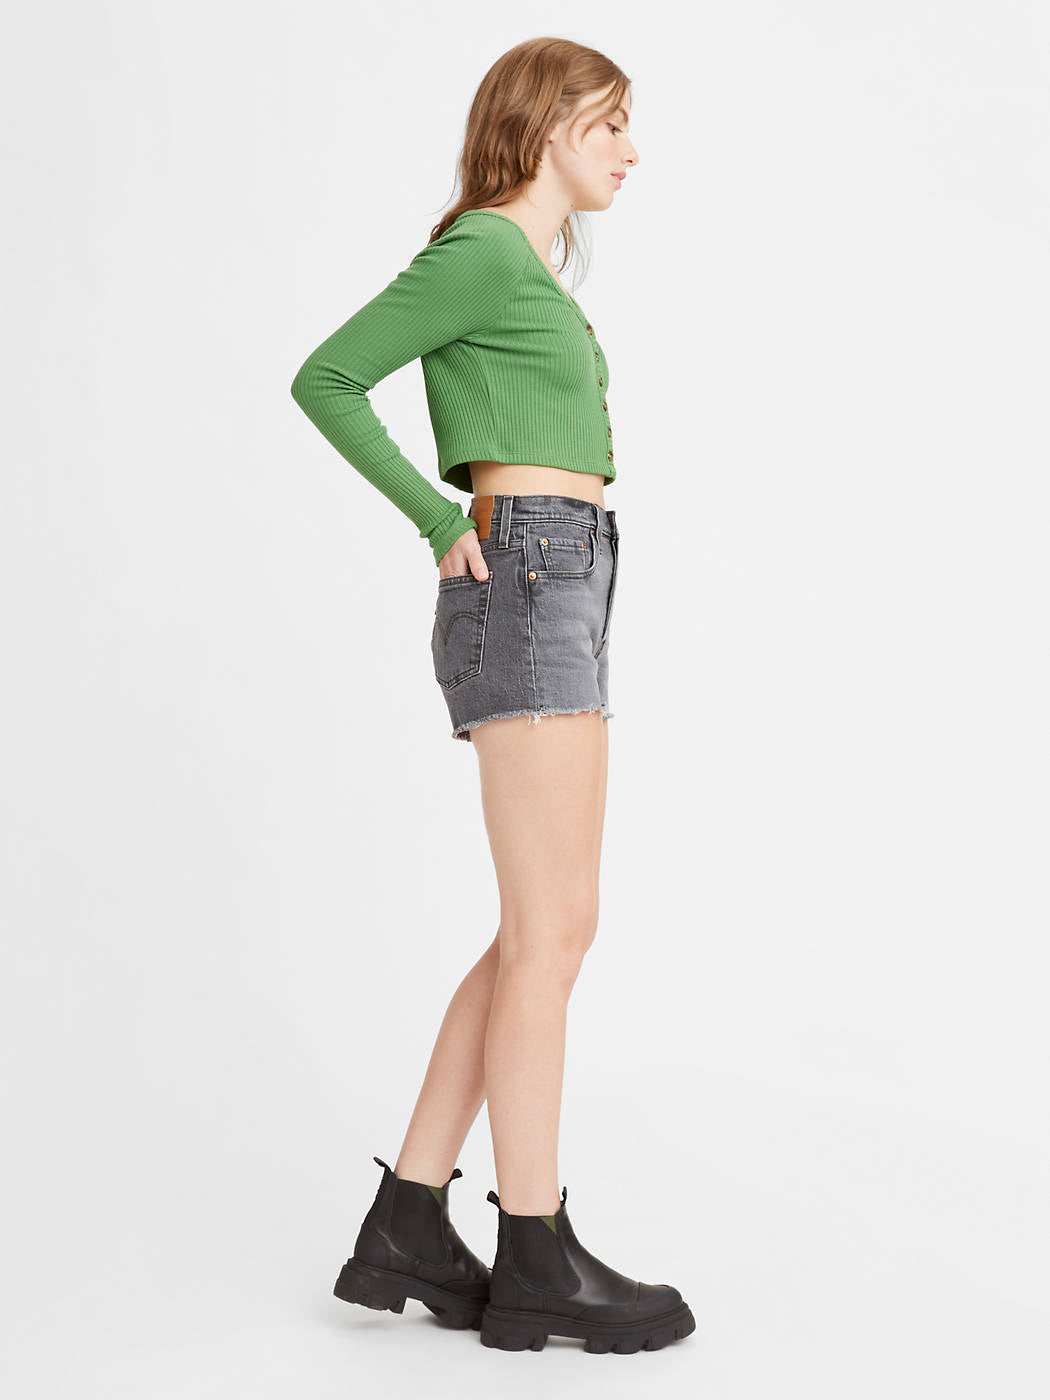 The 501 Original High Rise Short by Levi's - Cabo Rise – THE SKINNY